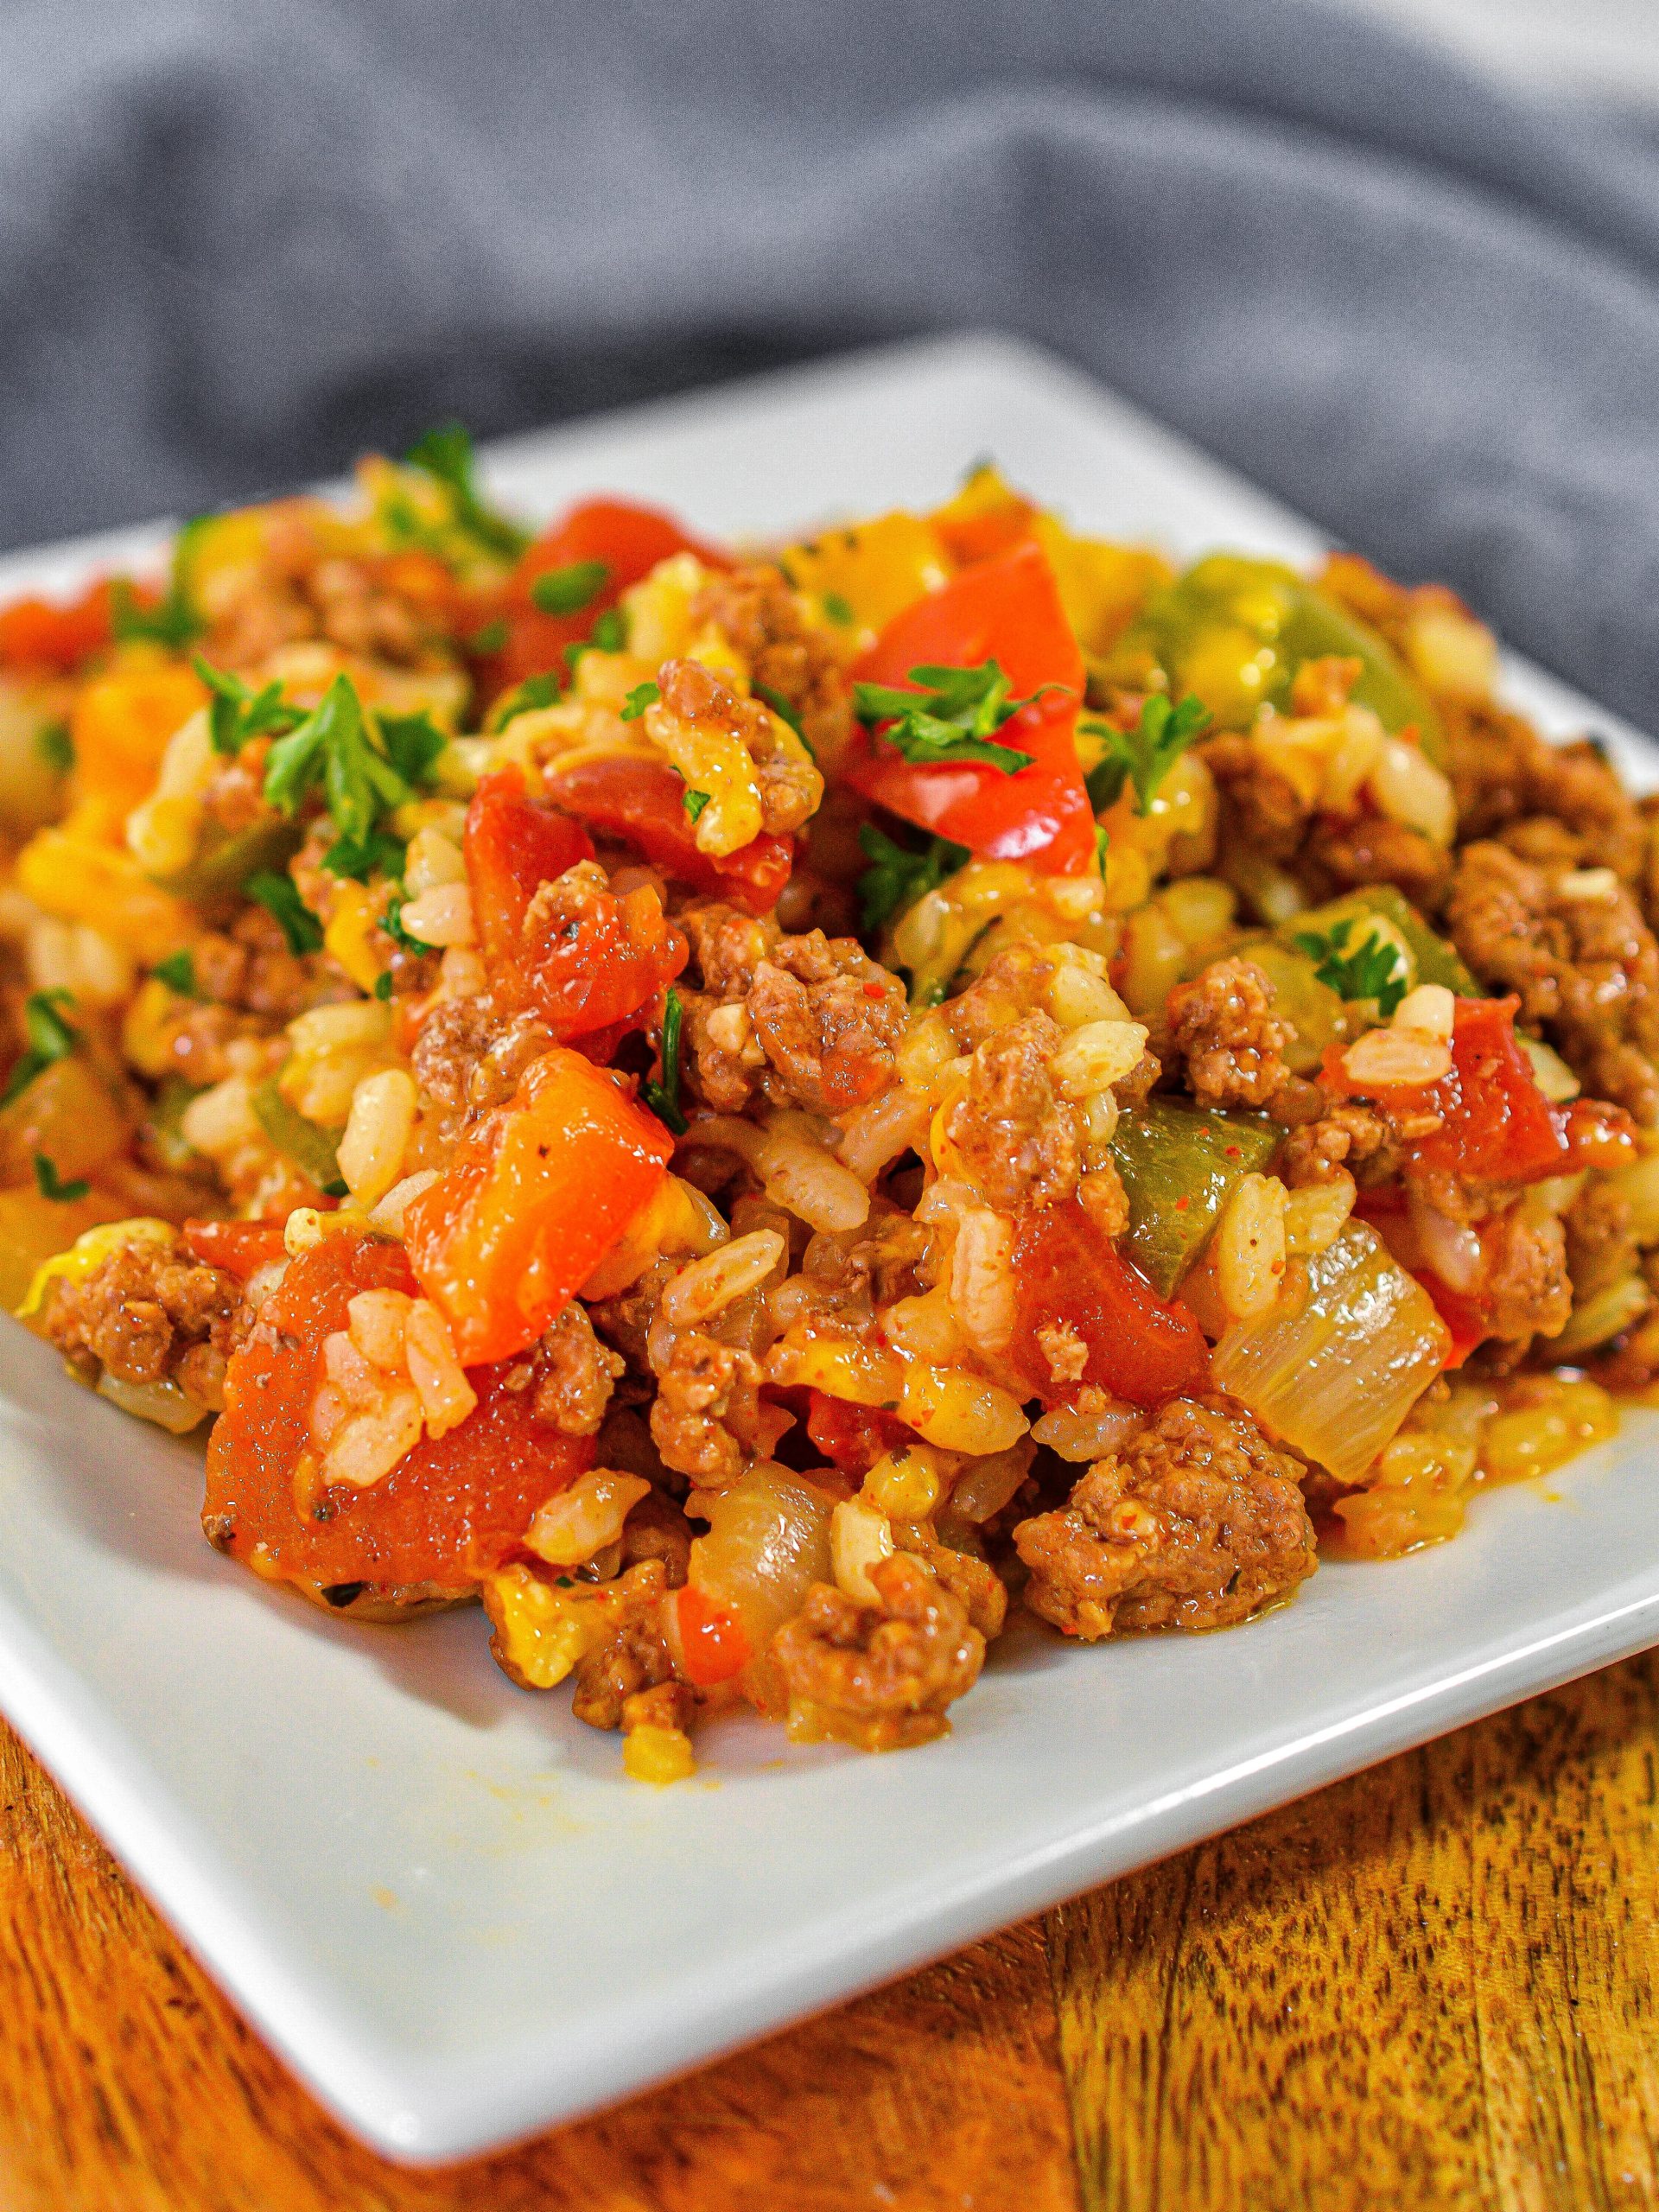 Ground beef and peppers skillet, ground beef peppers onions, ground beef recipes, green pepper recipes